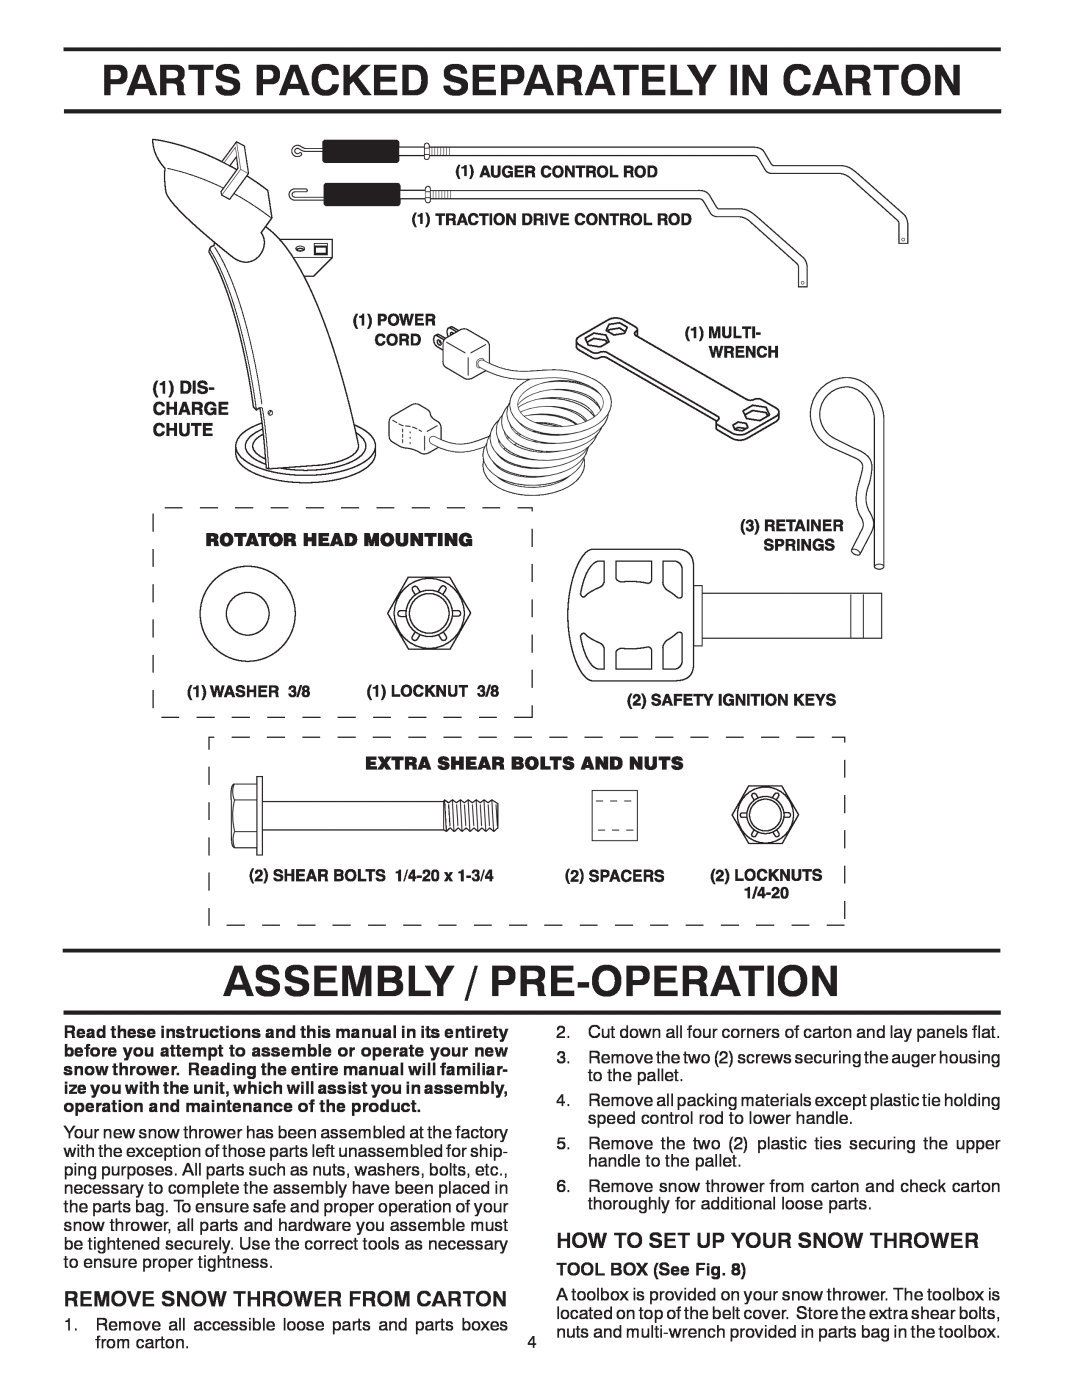 Poulan 416810 owner manual Parts Packed Separately In Carton, Assembly / Pre-Operation, How To Set Up Your Snow Thrower 